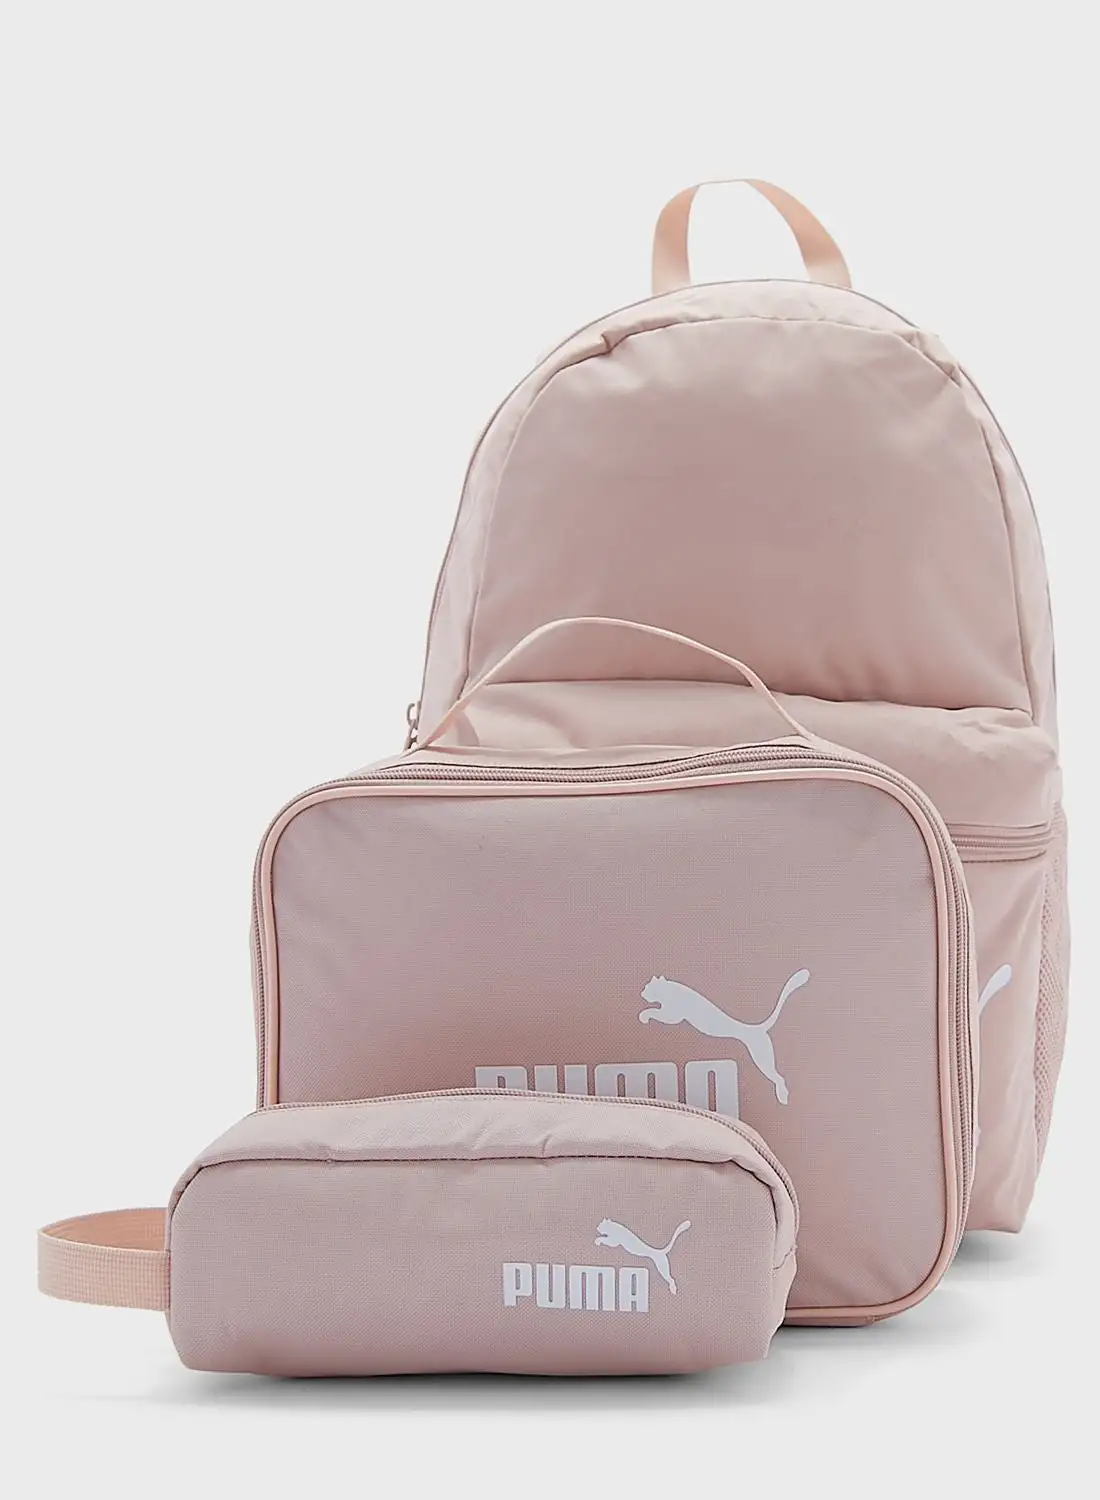 PUMA Bts Lunch Bag And Backpack